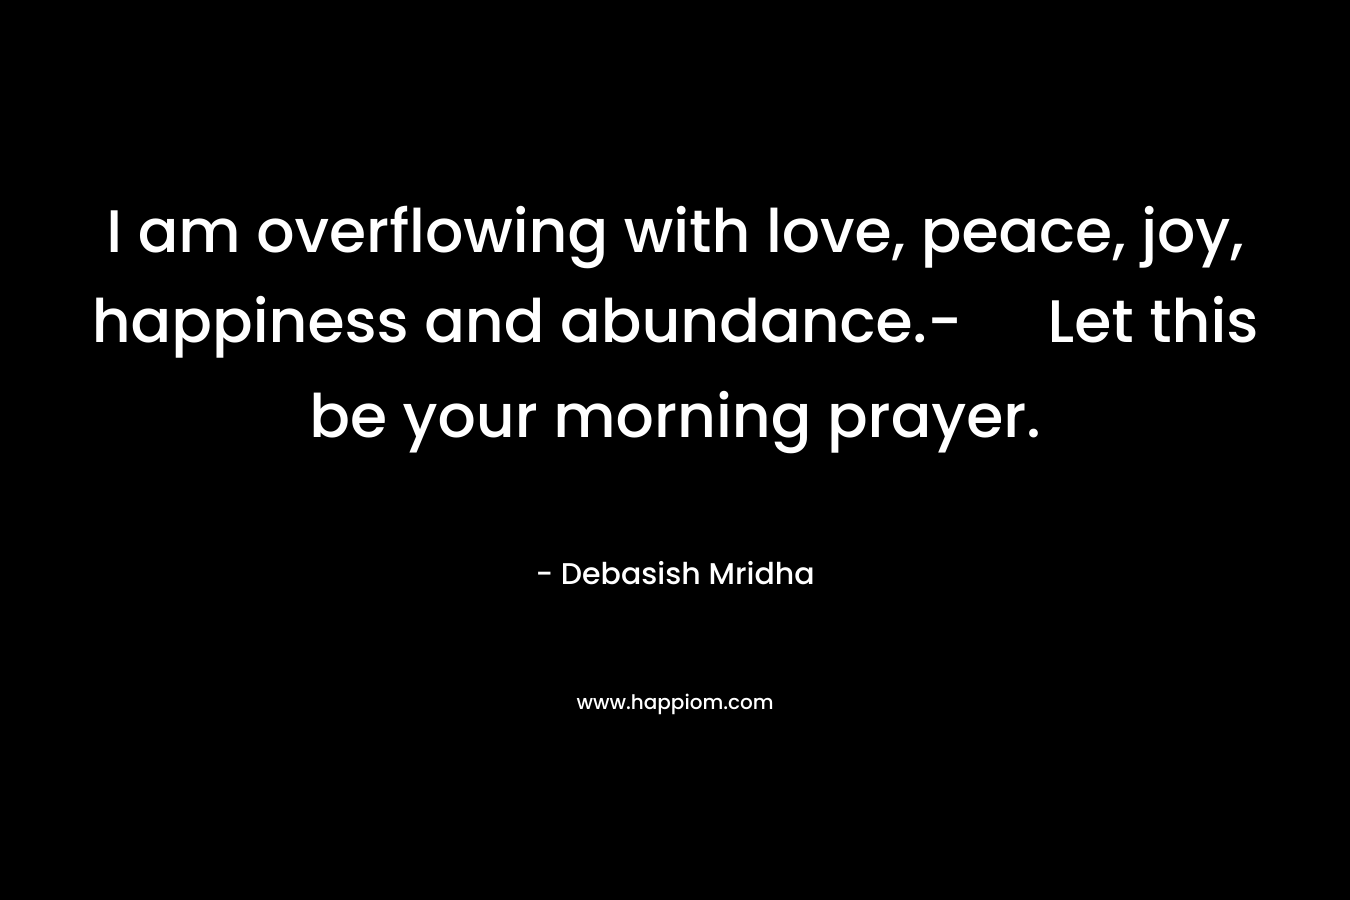 I am overflowing with love, peace, joy, happiness and abundance.- Let this be your morning prayer.